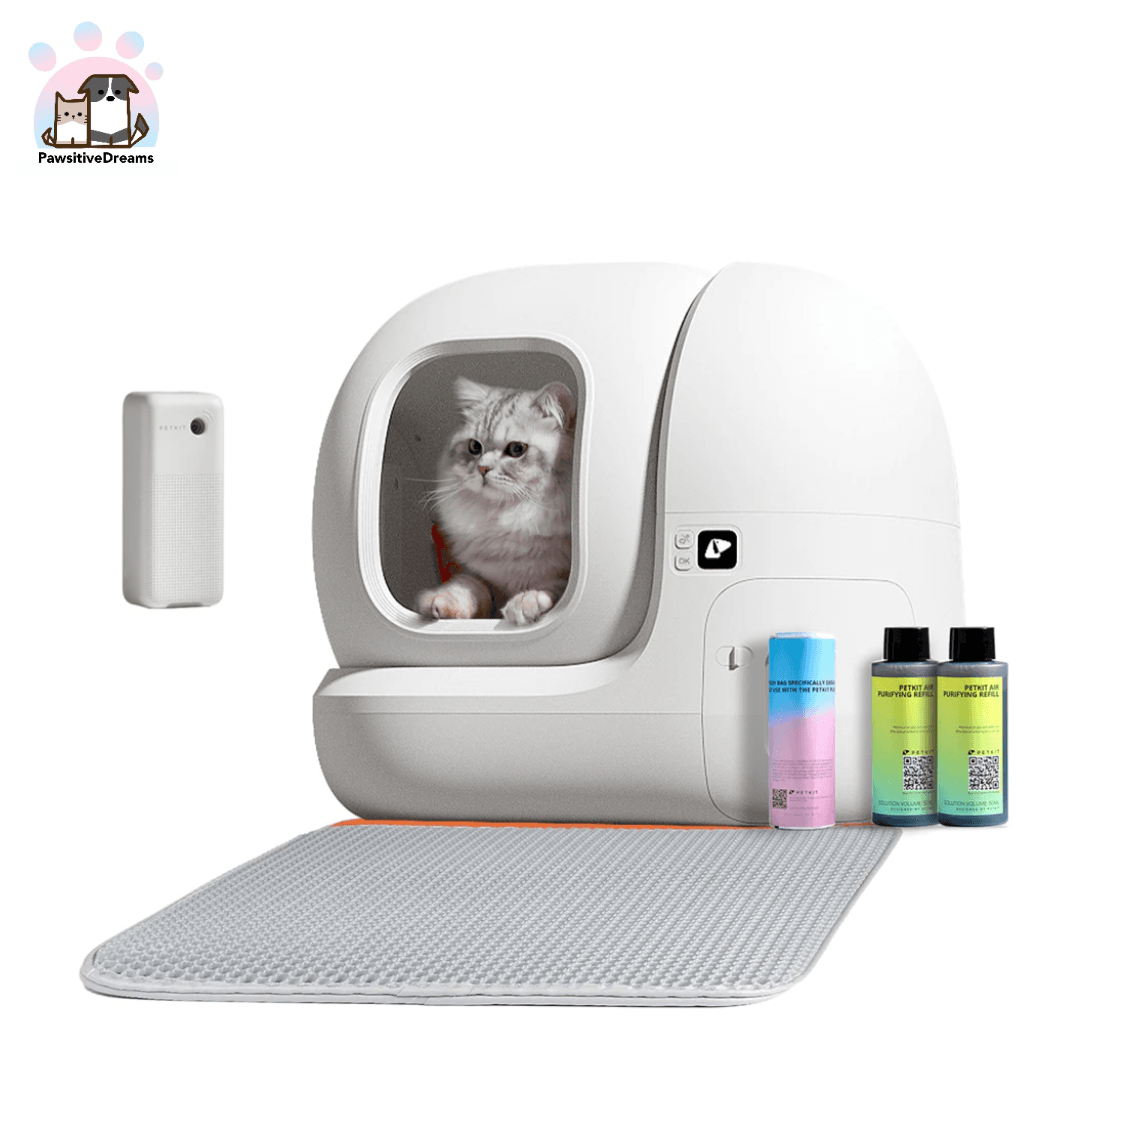 Petkit Pura Max Self-Cleaning Cat Litter Tray, Self-Cleaning, xSecure/Geurverwijdering/App Control/76L Maximum Capacity, Automatic Cat Litter Tray for Multiple Cats - Pawsitive Dreams